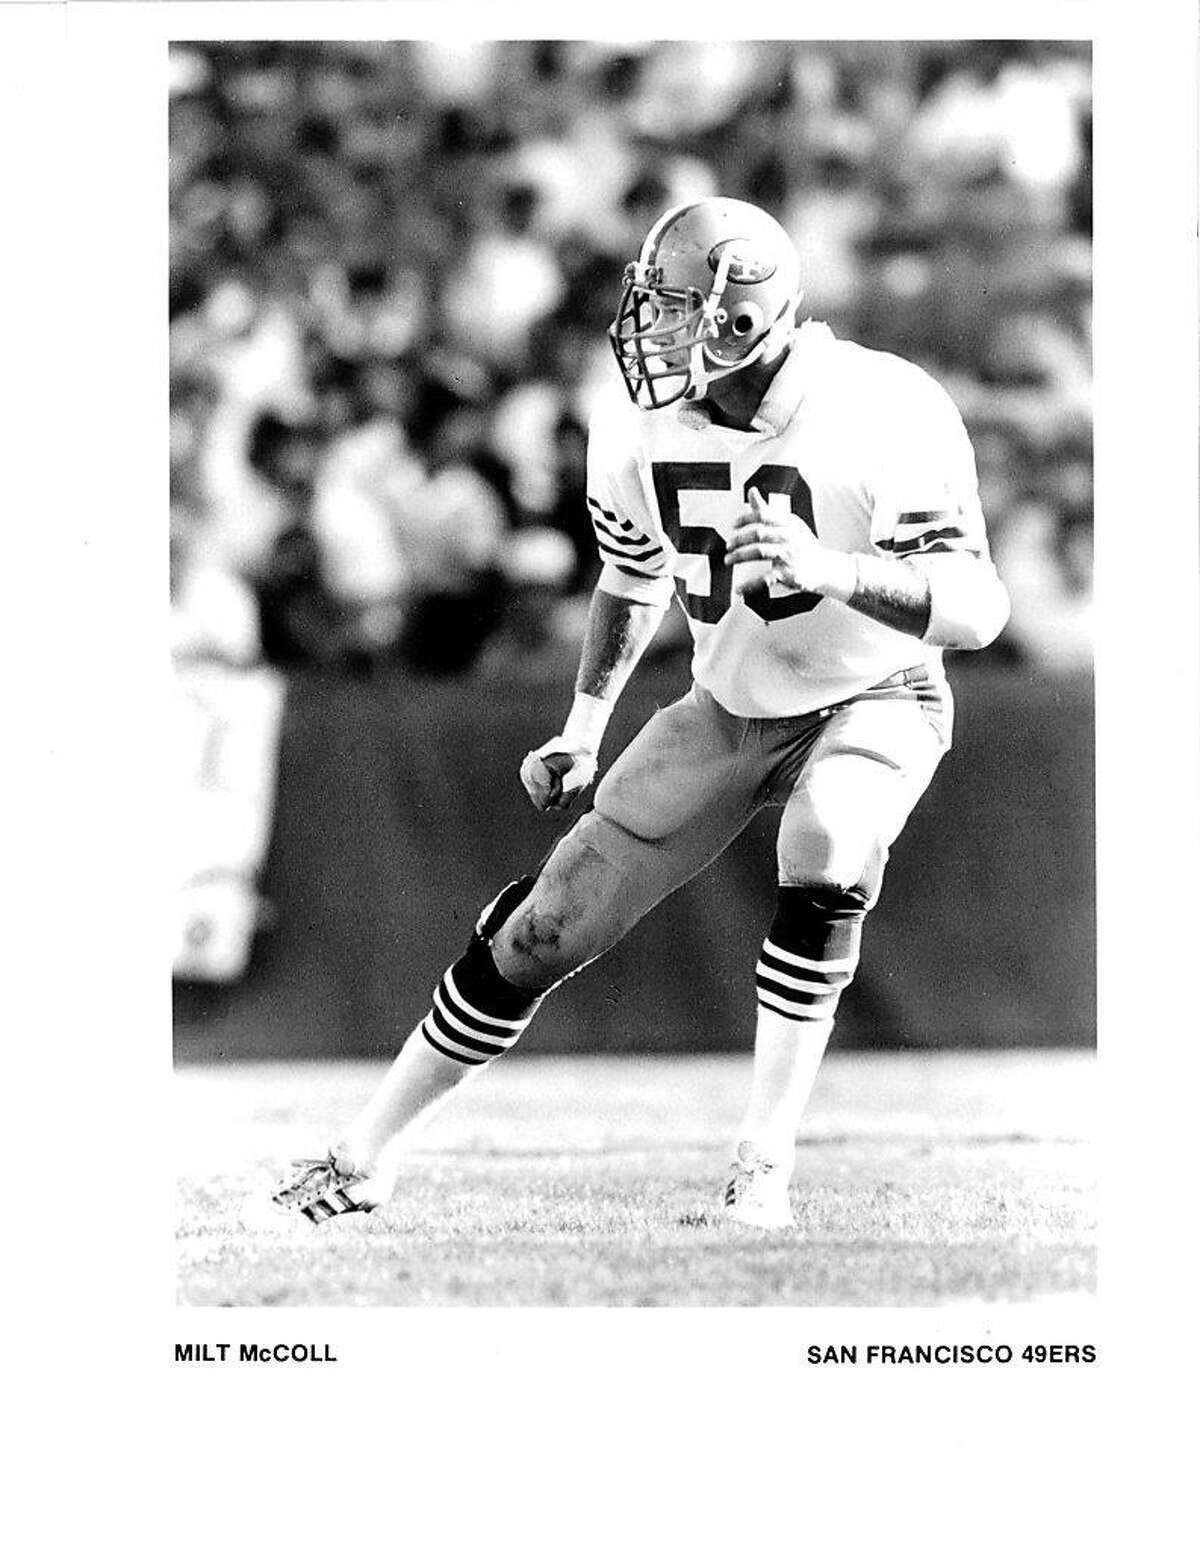 Milt McColl played outside linebacker for the 49ers from 1981-87.